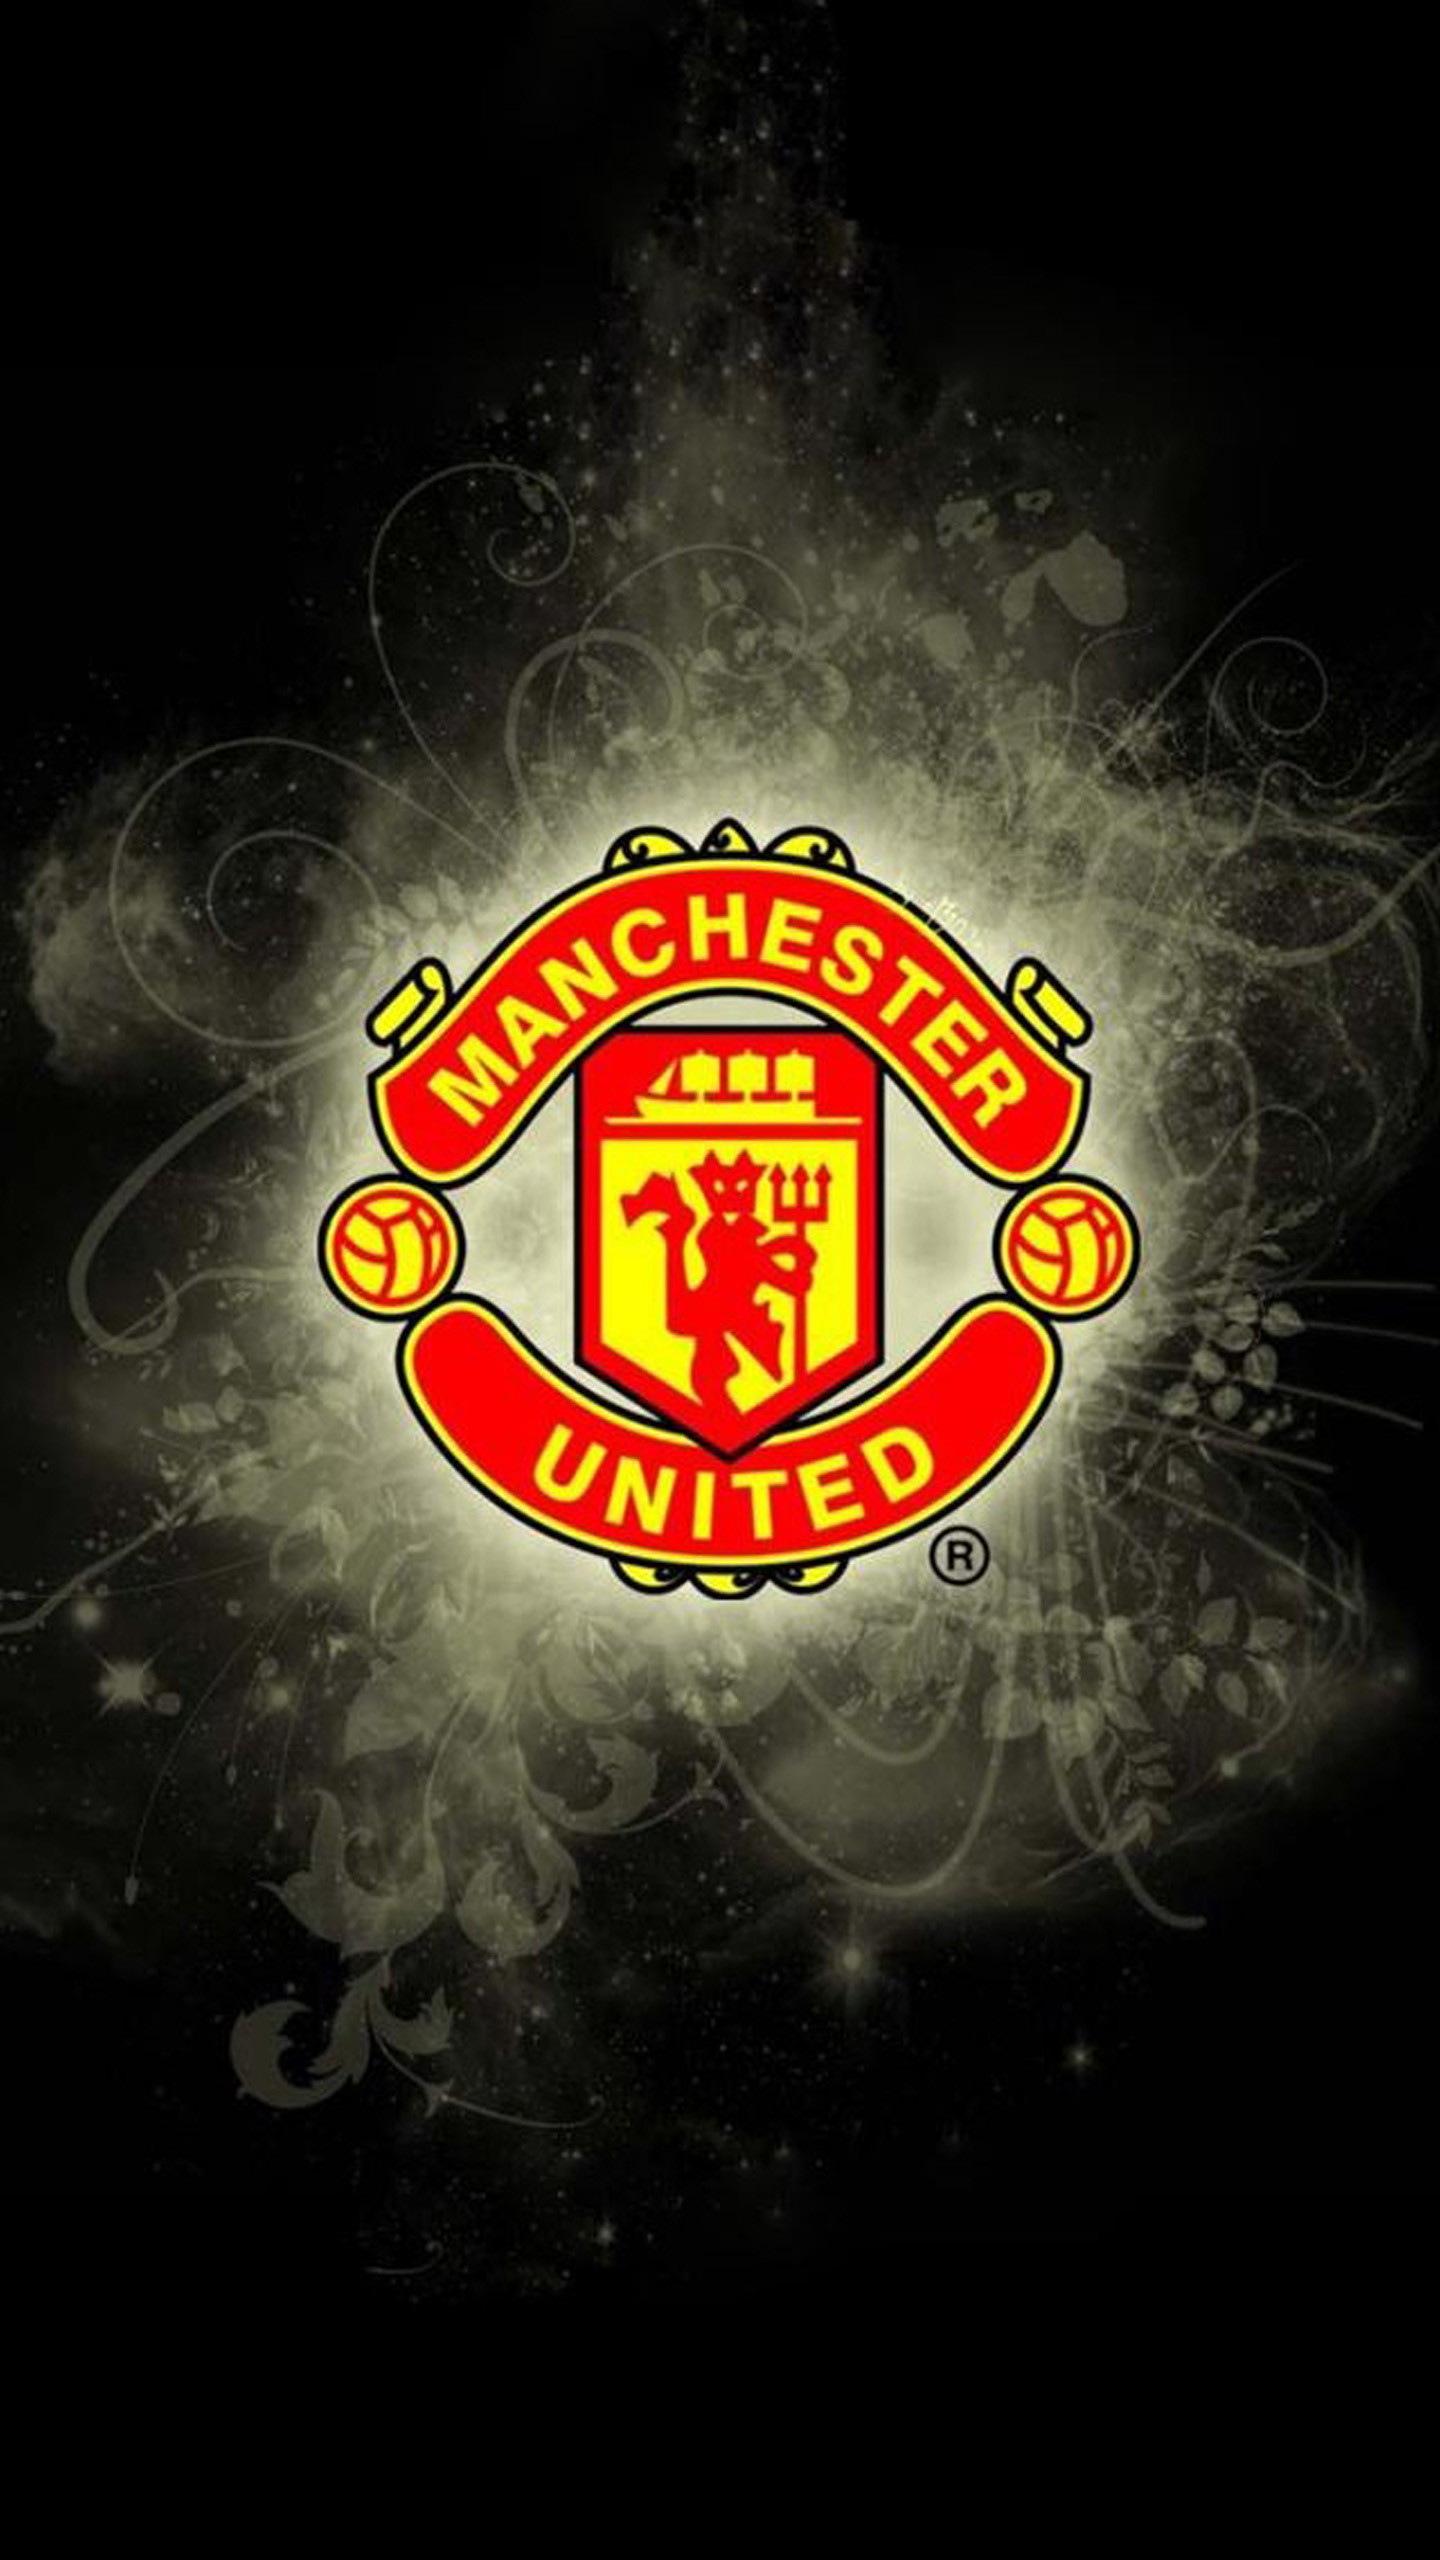 1440x2560 The football club Manchester United